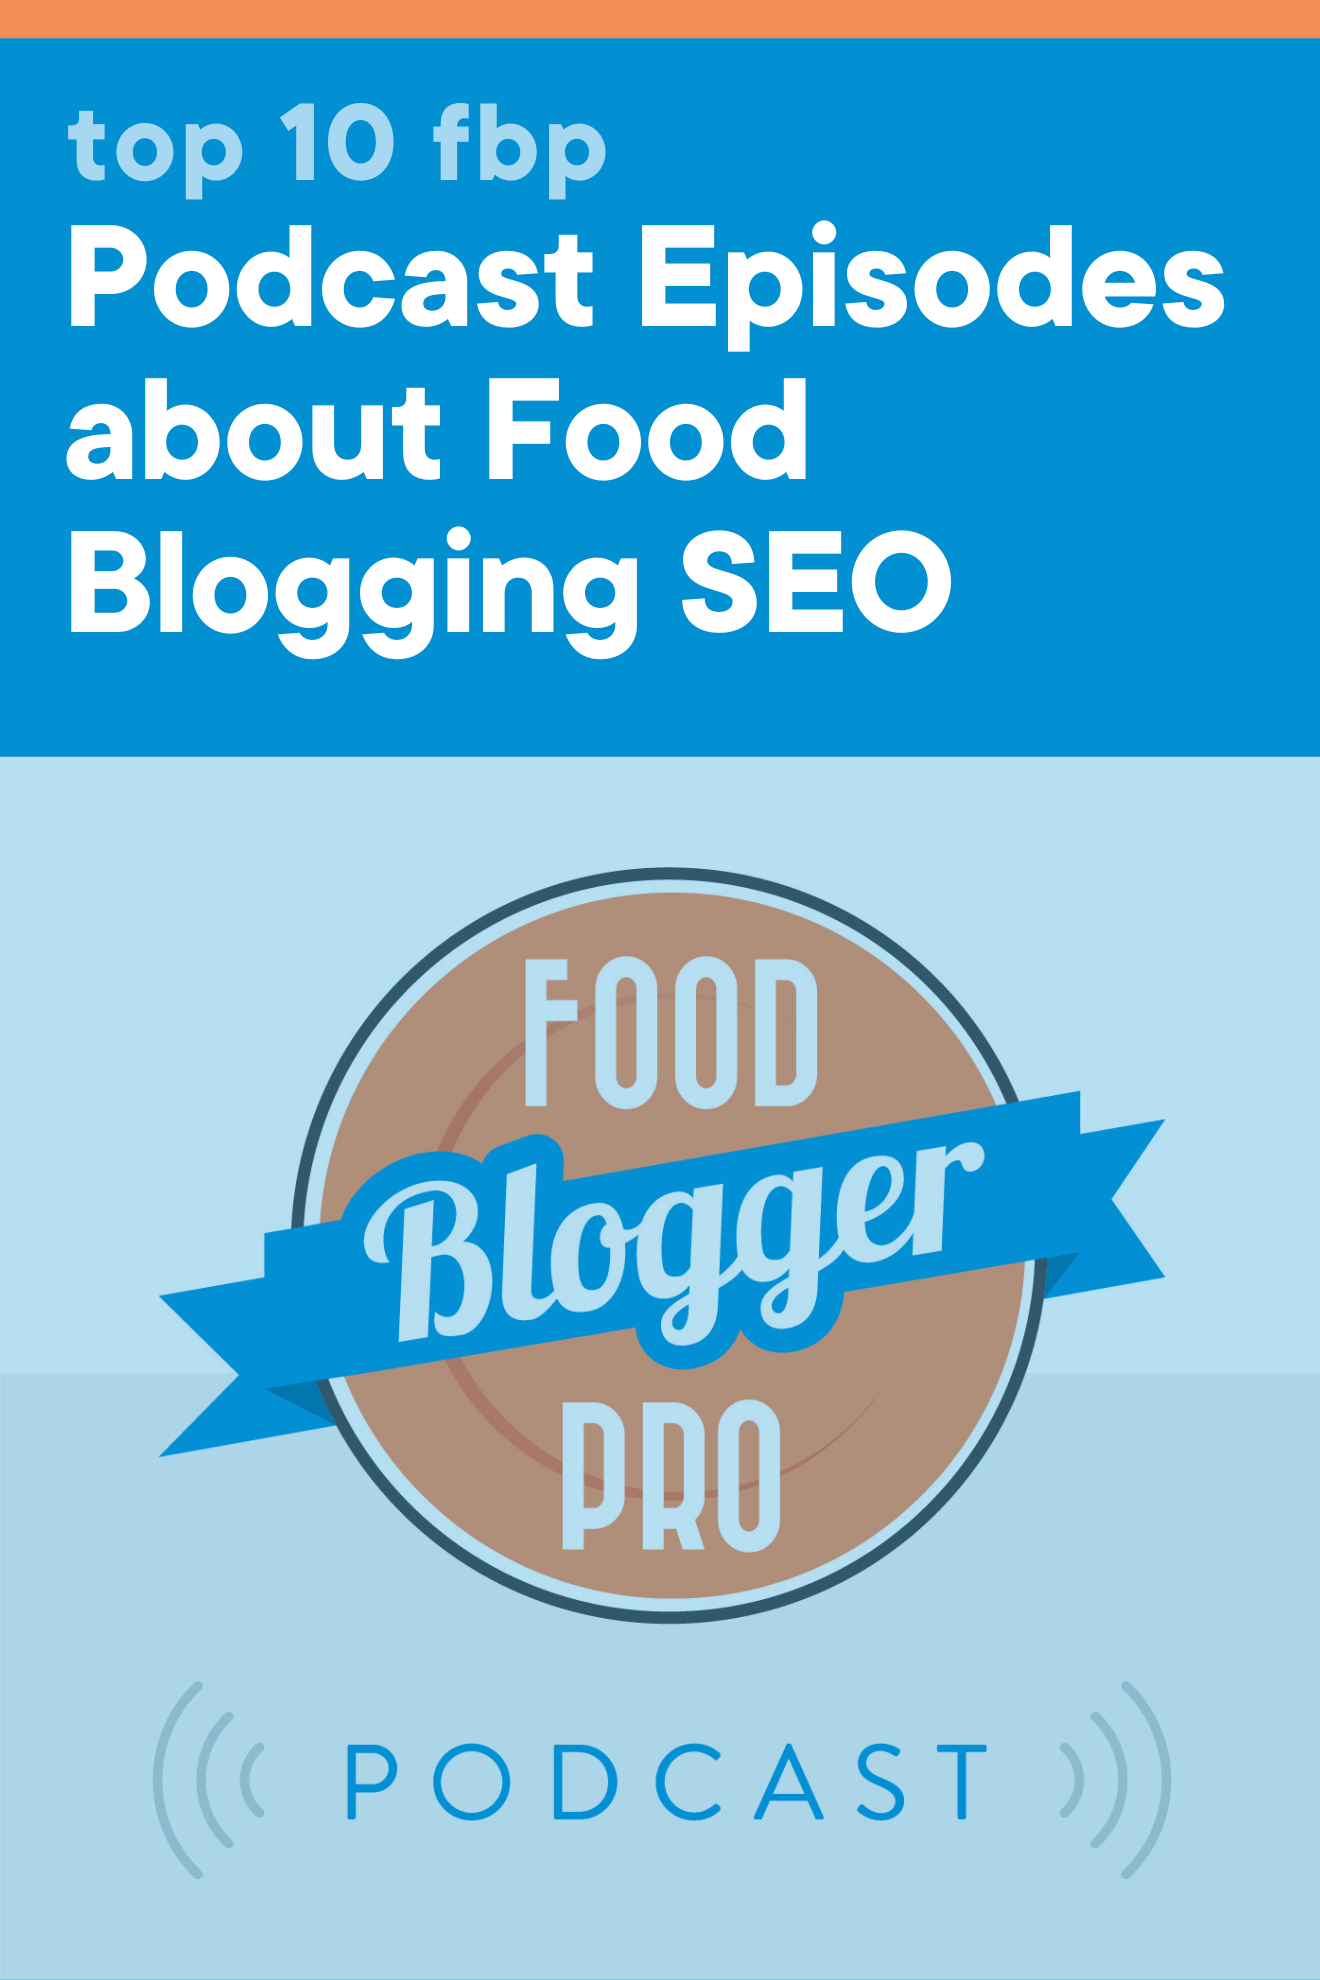 The Food Blogger Pro Podcast logo with the title of this blog post: 'Top 10 FBP Podcast Episodes about Food Blogging SEO.'